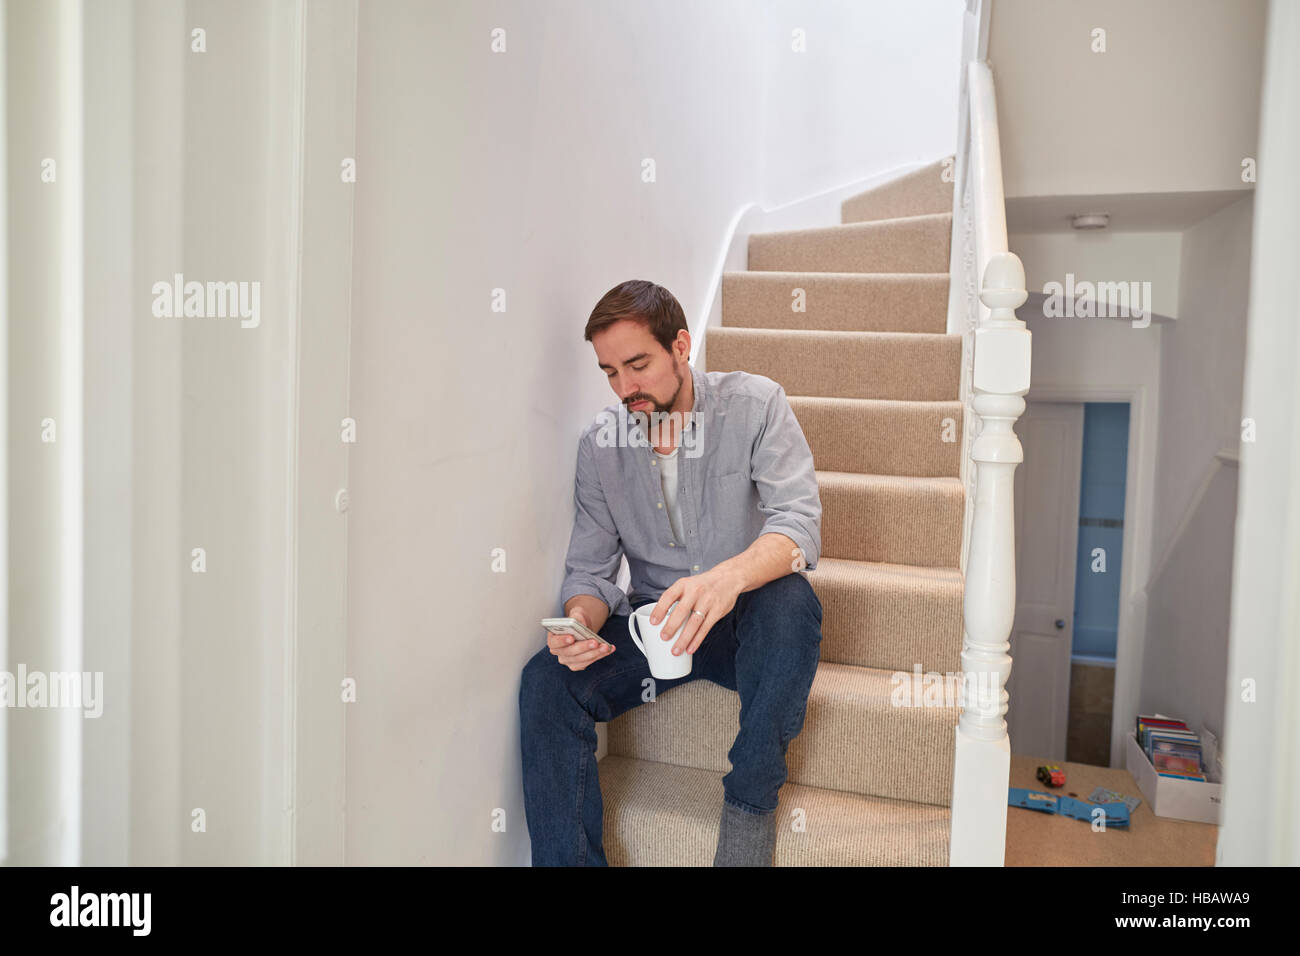 Mid adult man sitting on staircase reading smartphone texts Stock Photo